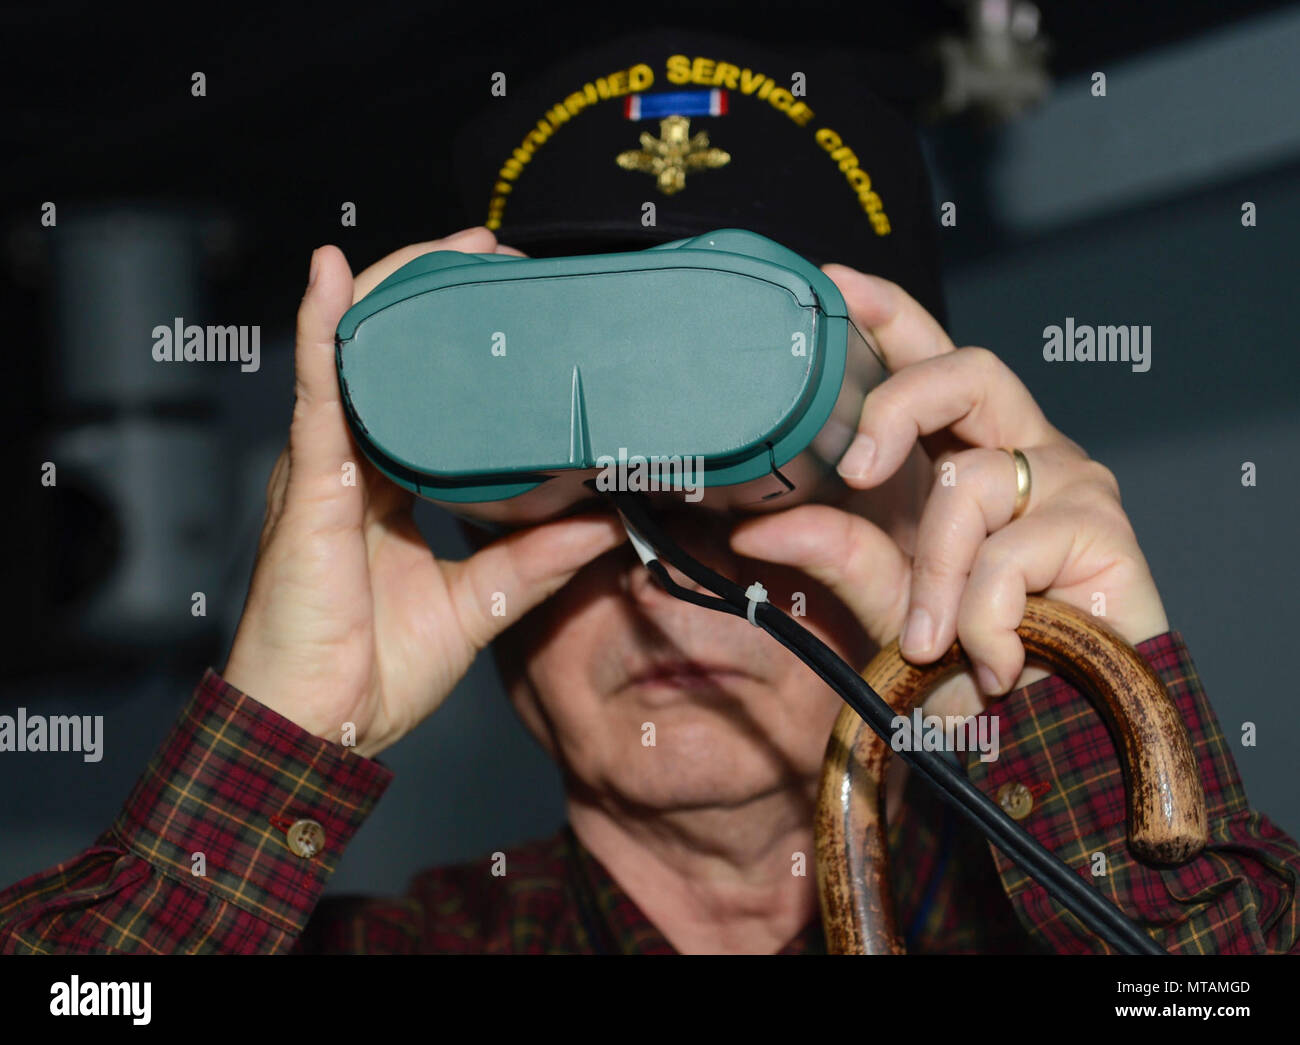 Retired U.S. Army 1st Sgt. Claude Quick, Legion of Valor member, looks through simulation binoculars at the Maritime Intermodal Training Department while on a tour at Joint Base Langley-Eustis, Va., April 21, 2017. Each year, members of the Legion of Valor gather for an annual convention to enhance their understanding of current military affairs and provide mentorship from personal accomplishments or failures. Stock Photo